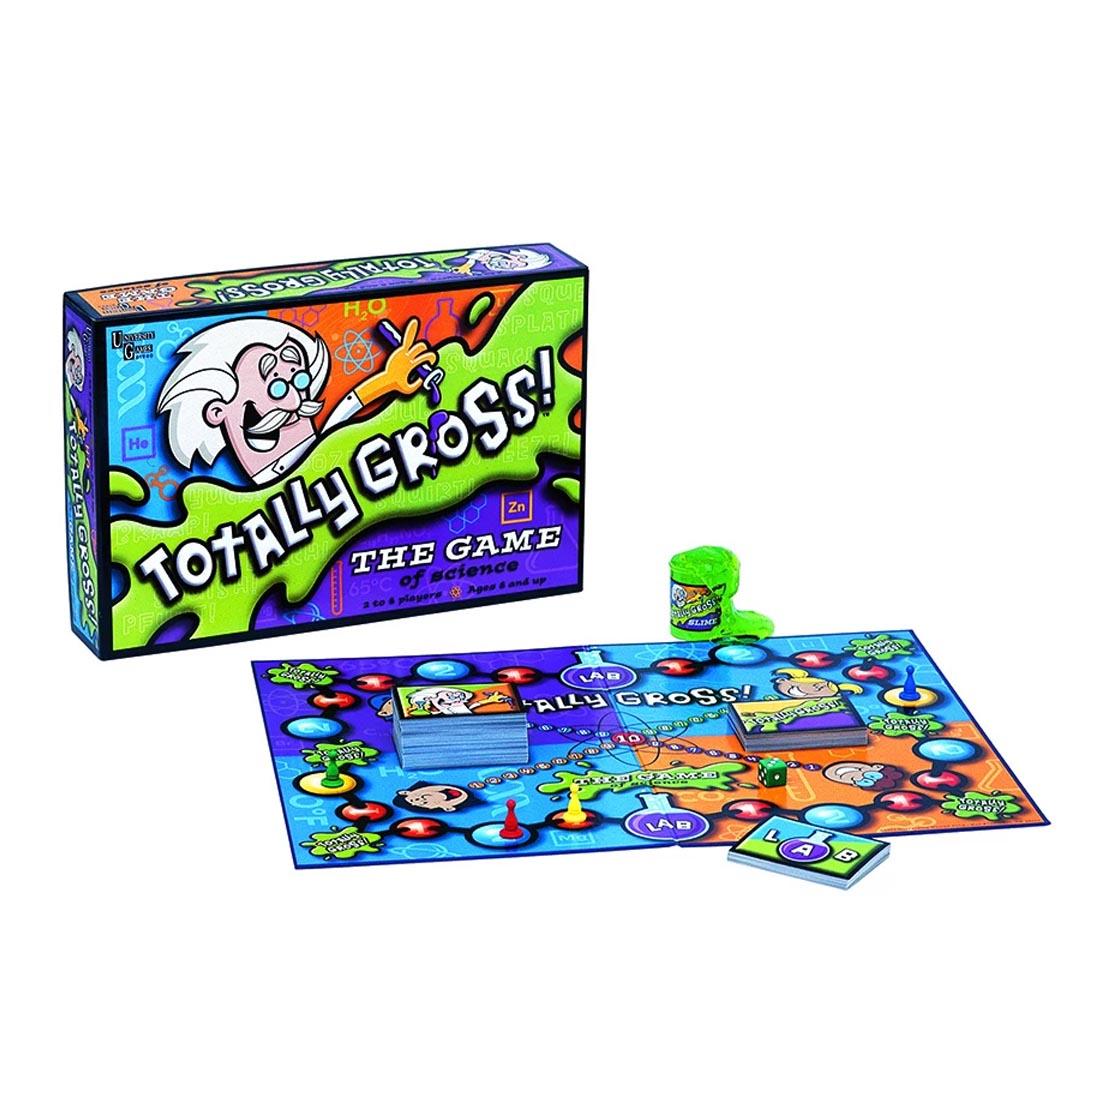 Totally Gross! The Game of Science by University Games